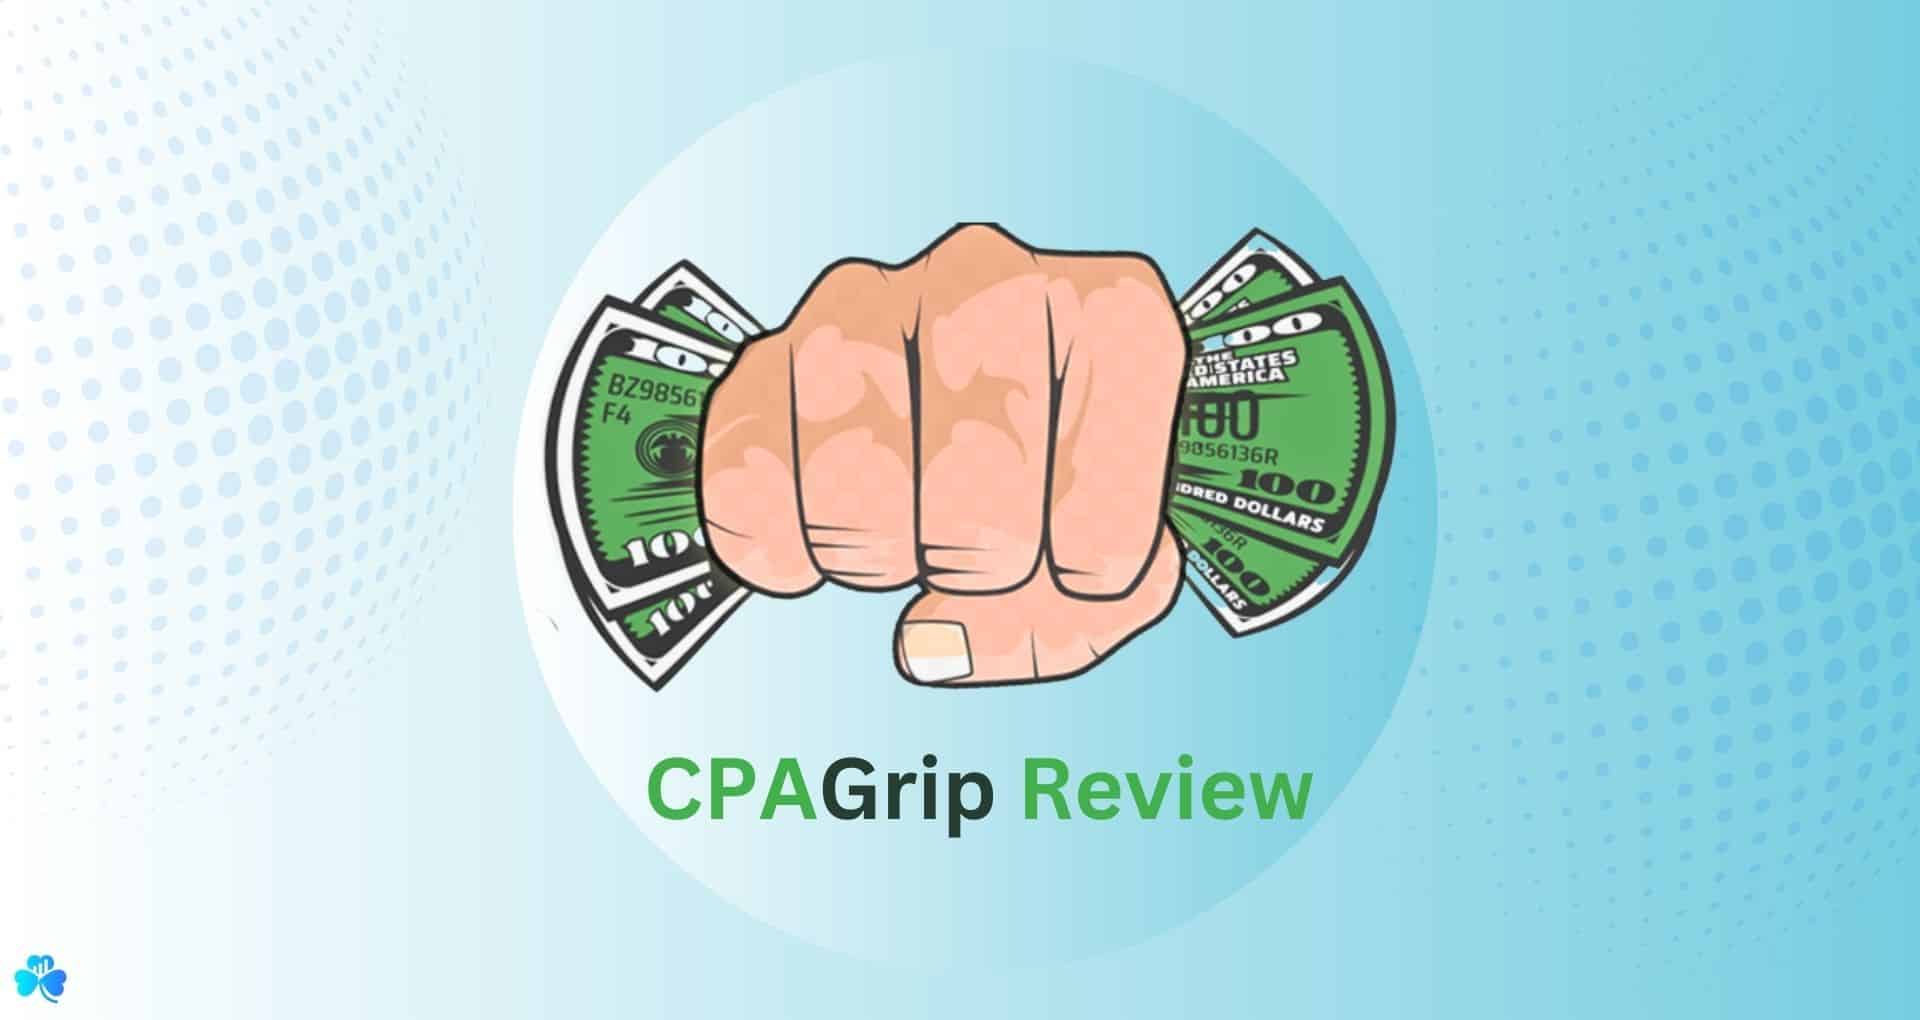 cpagrip review featured image